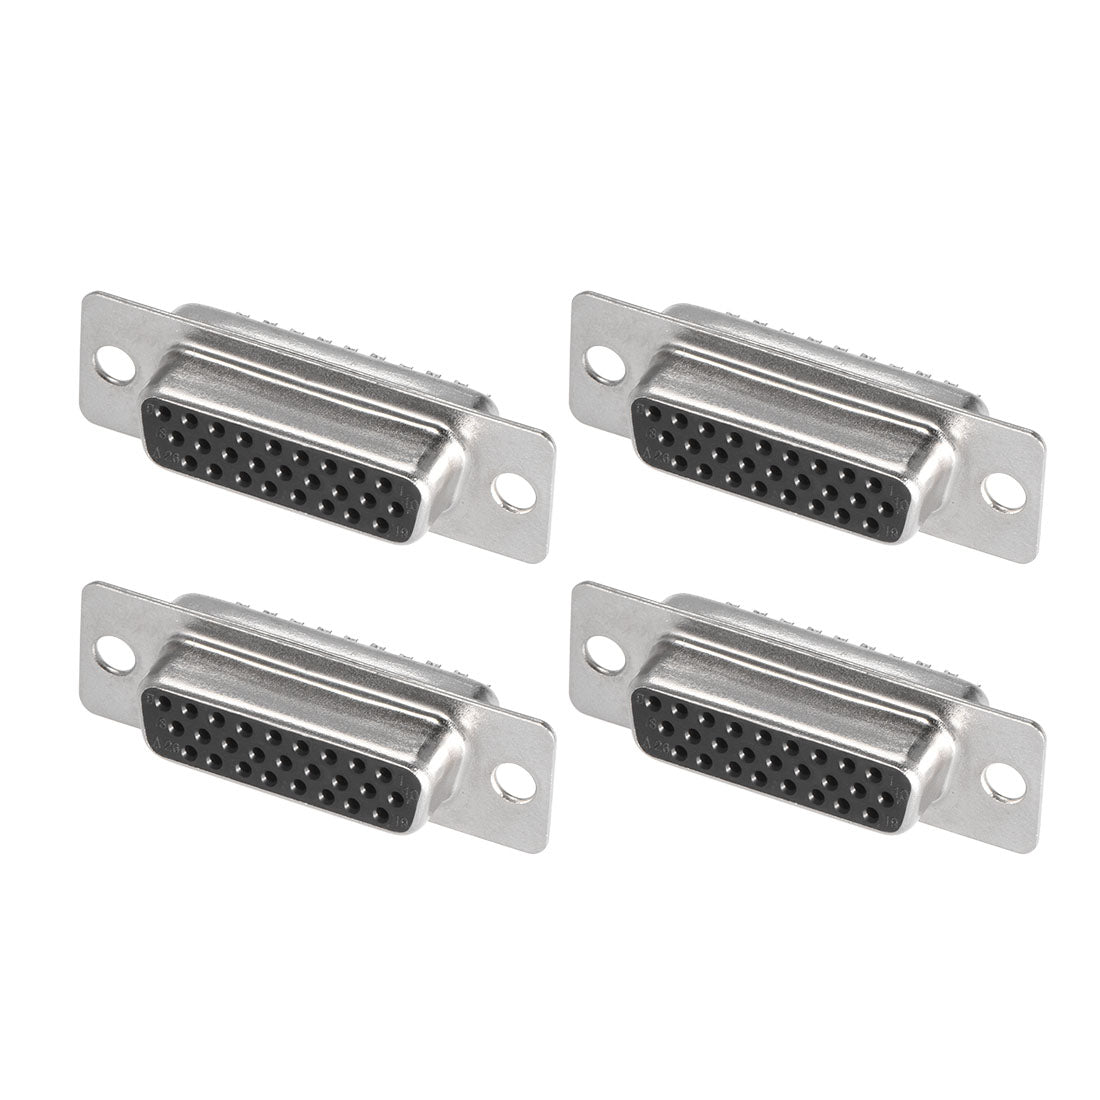 uxcell Uxcell D-sub Connector DB26 Female Socket 26-pin 3-row Port Terminal Breakout for Mechanical Equipment CNC Computers Instrumentation 4pcs